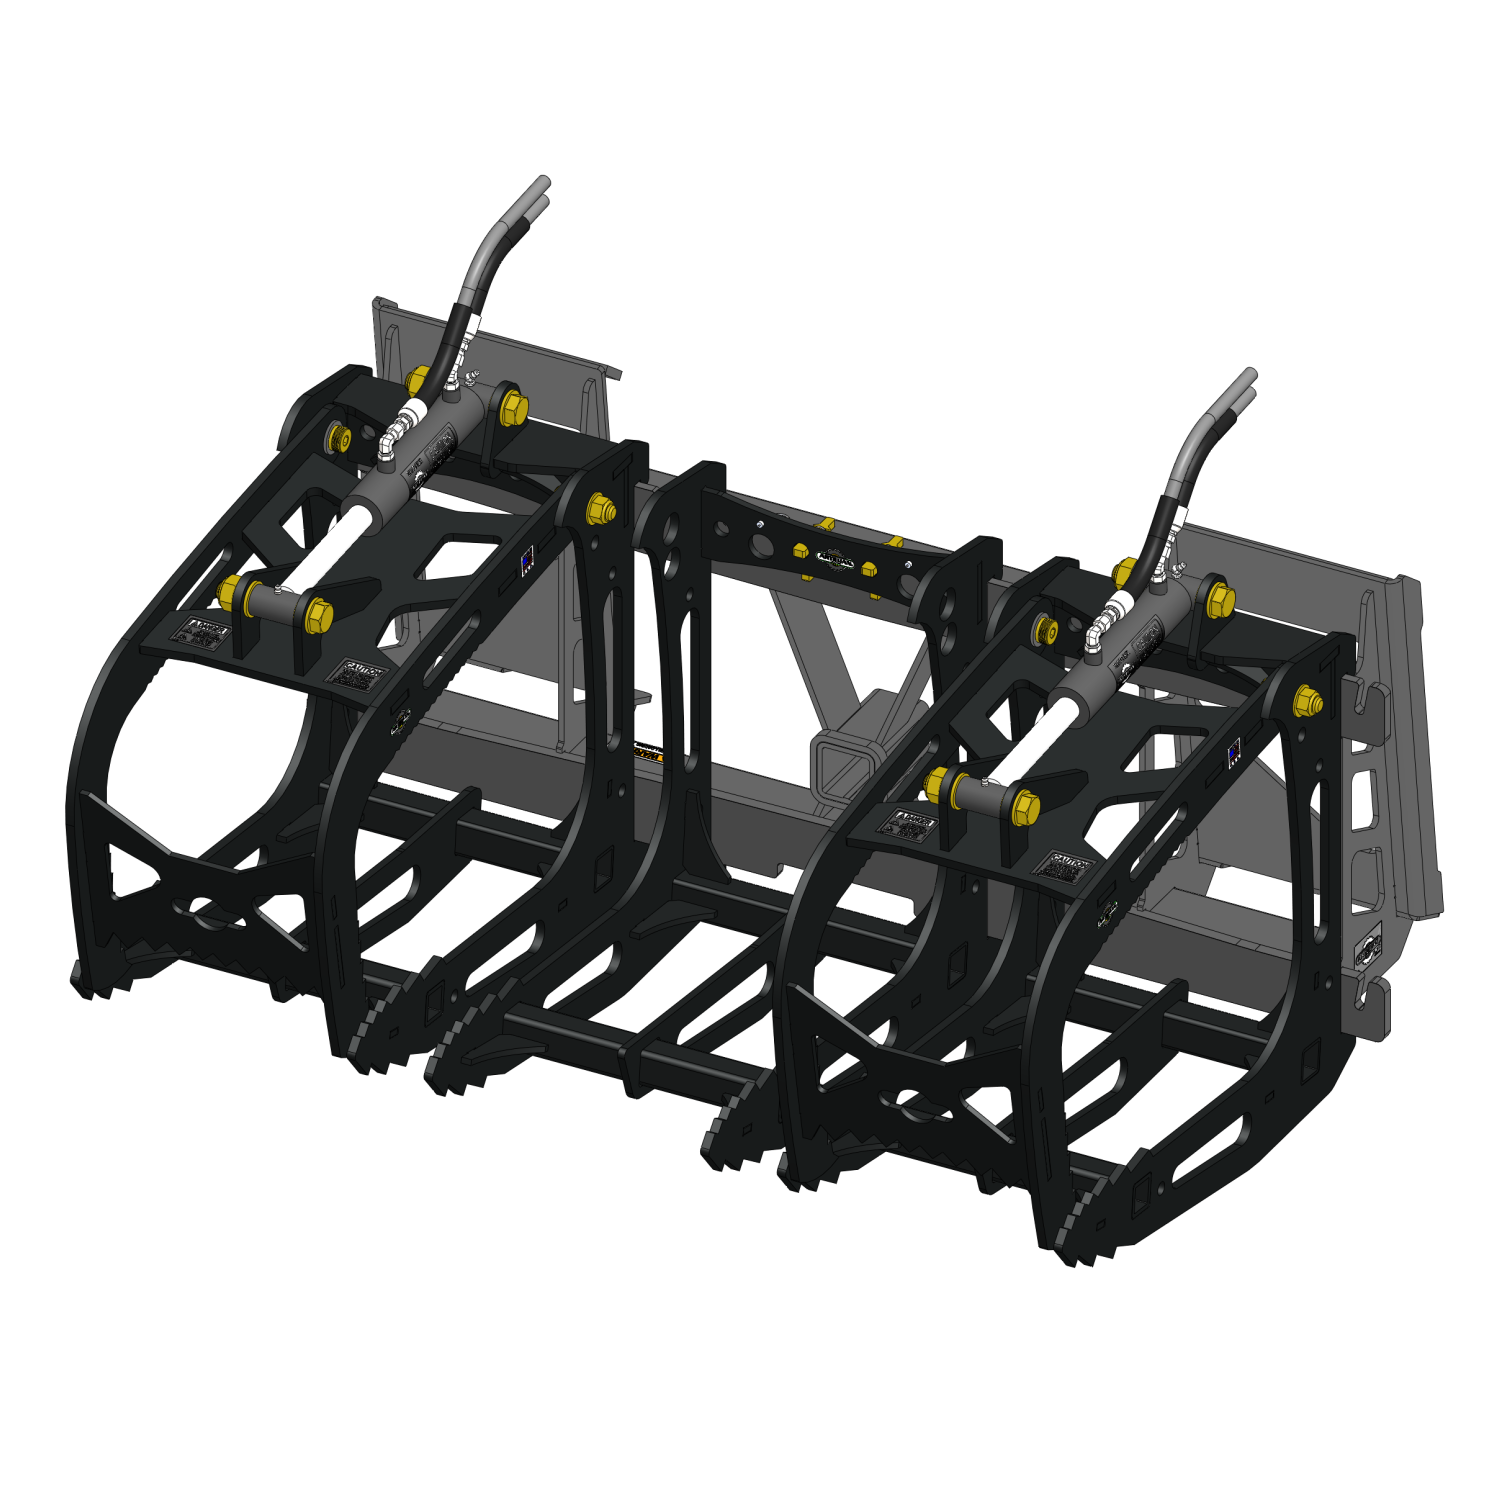 3000 Lb. Skid Steer Quick Attach Frame with 2 Original Sectional Grapples and 1 Rake